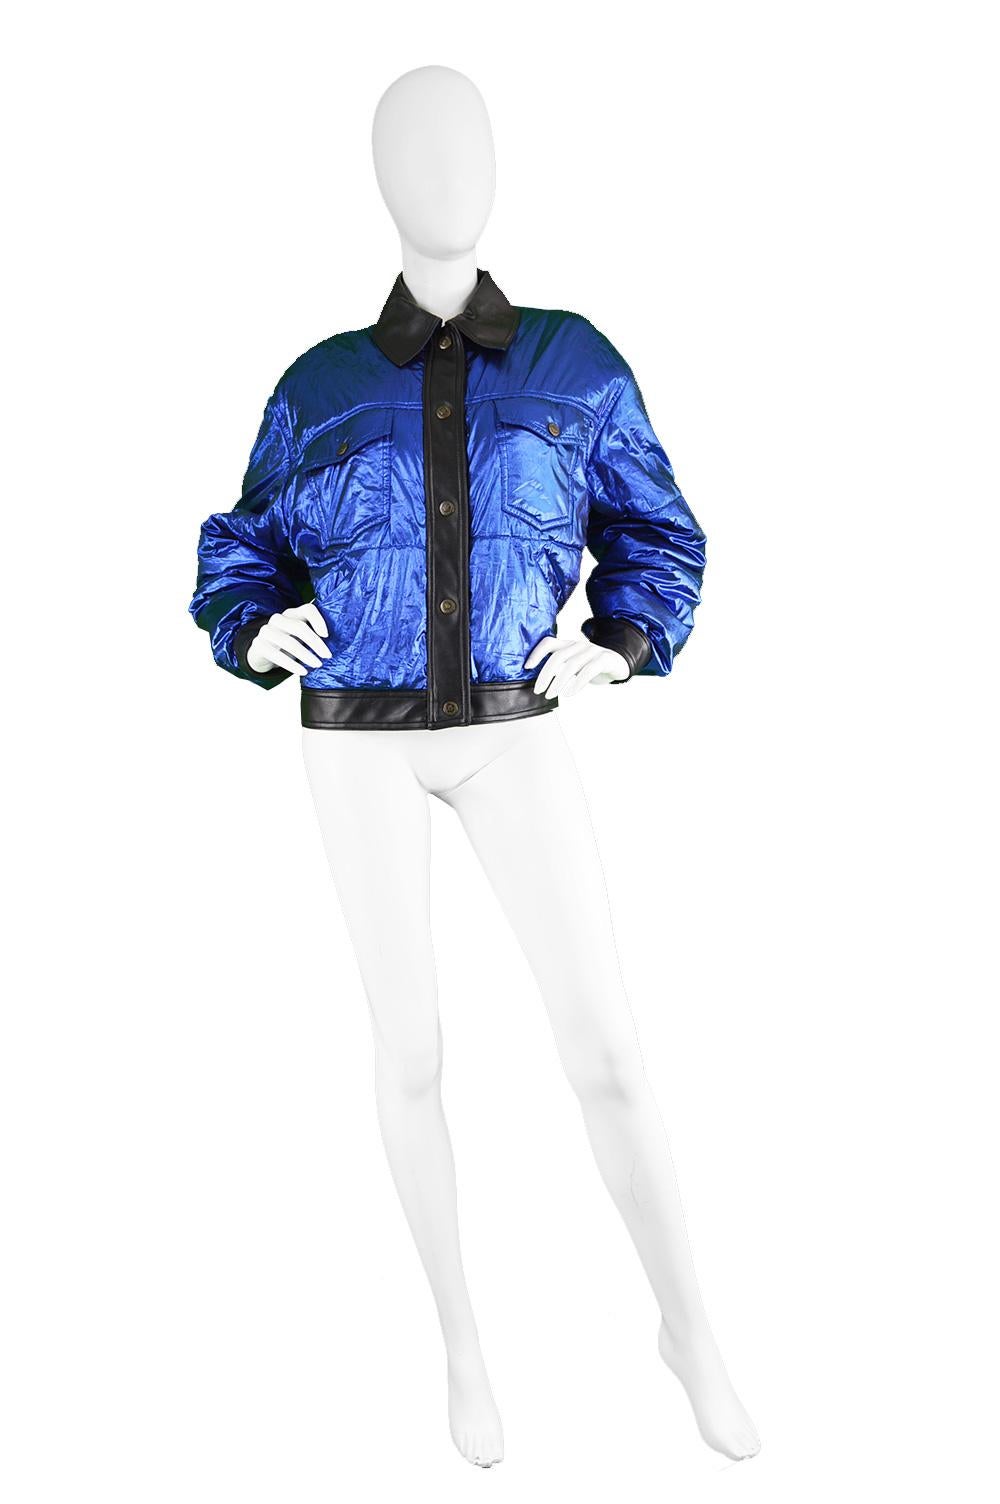 Moschino Vintage Metallic Blue Lamé Women's Bomber Puffer Jacket , 1990s

Size: Marked IT 42/ GB 12/ US 8 but best fits a modern women's Small to Medium with an intentionally oversized fit. Please check measurements. 
Chest - 46” / 117cm 
Waist -